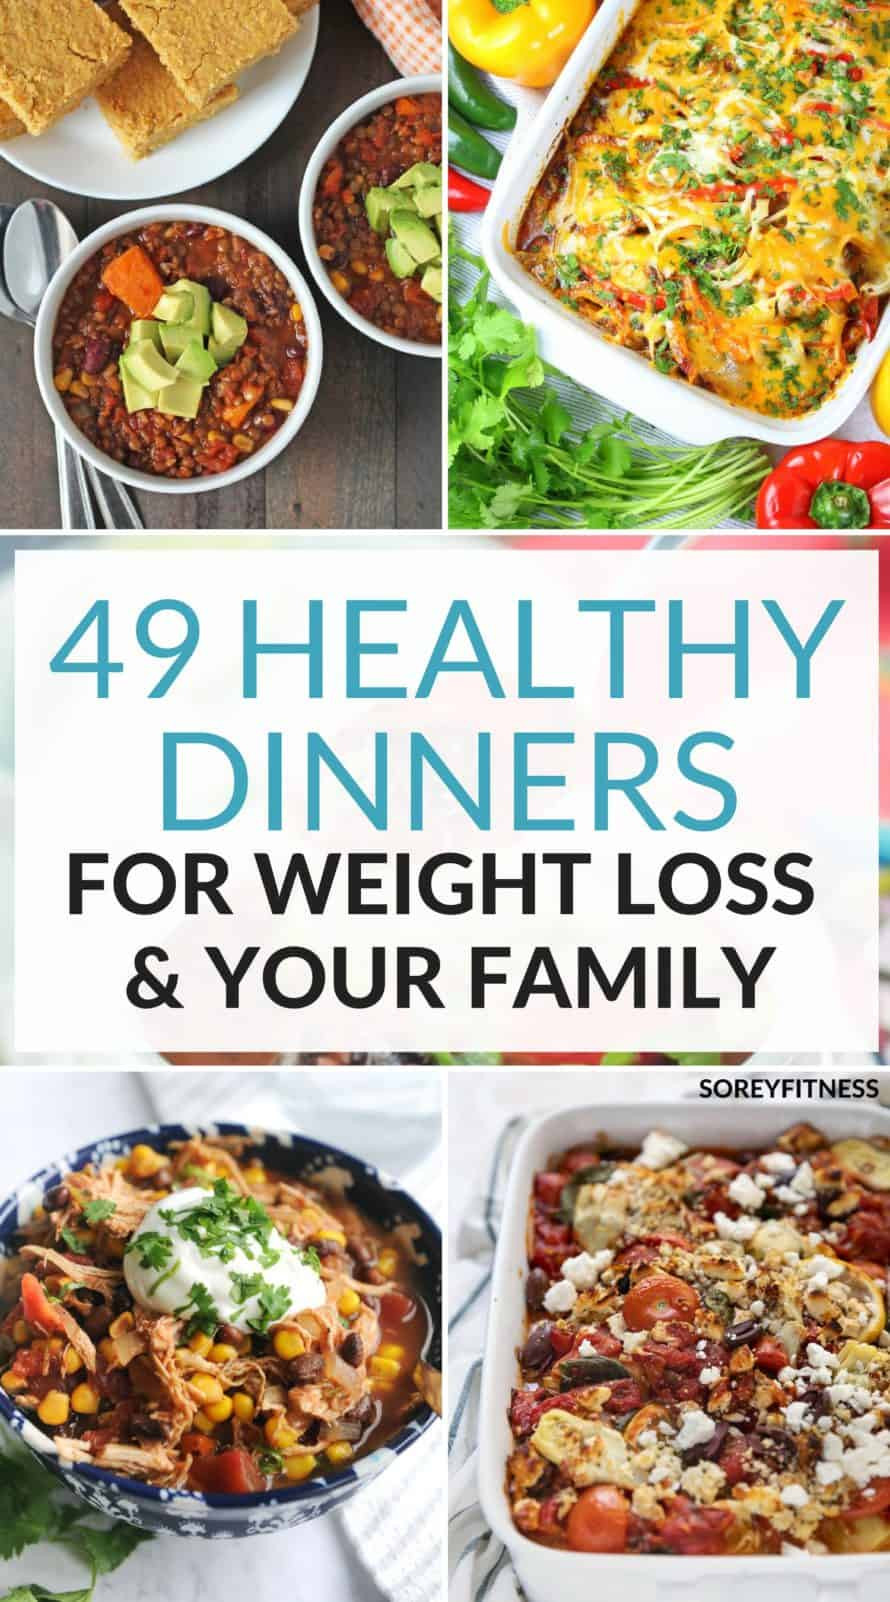 Healthy Meal Recipes For Weight Loss
 Healthy Dinner Ideas For Weight Loss 49 Quick Easy Recipes